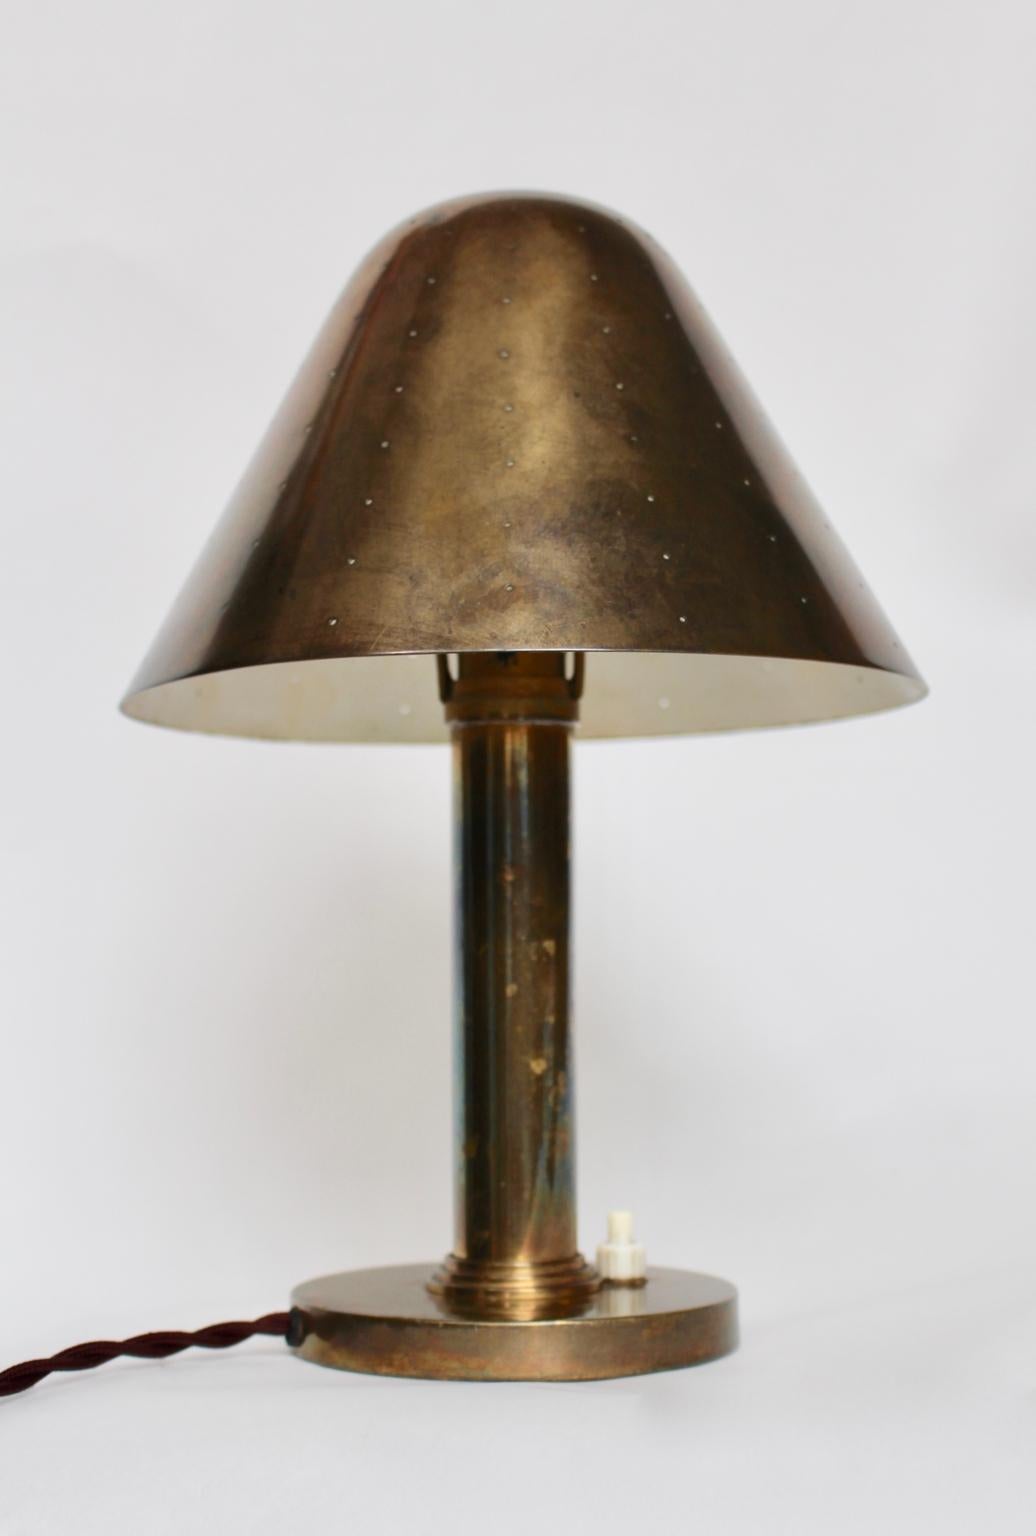 We present a very rare table lamp, bedside Lamp or wall light designed by Carl-Axel Acking attributed, Sweden, 1940s.
The table lamp or sconce was made of brass with a perforated shade.
Furthermore, the table lamp features a movable lamp shade. So